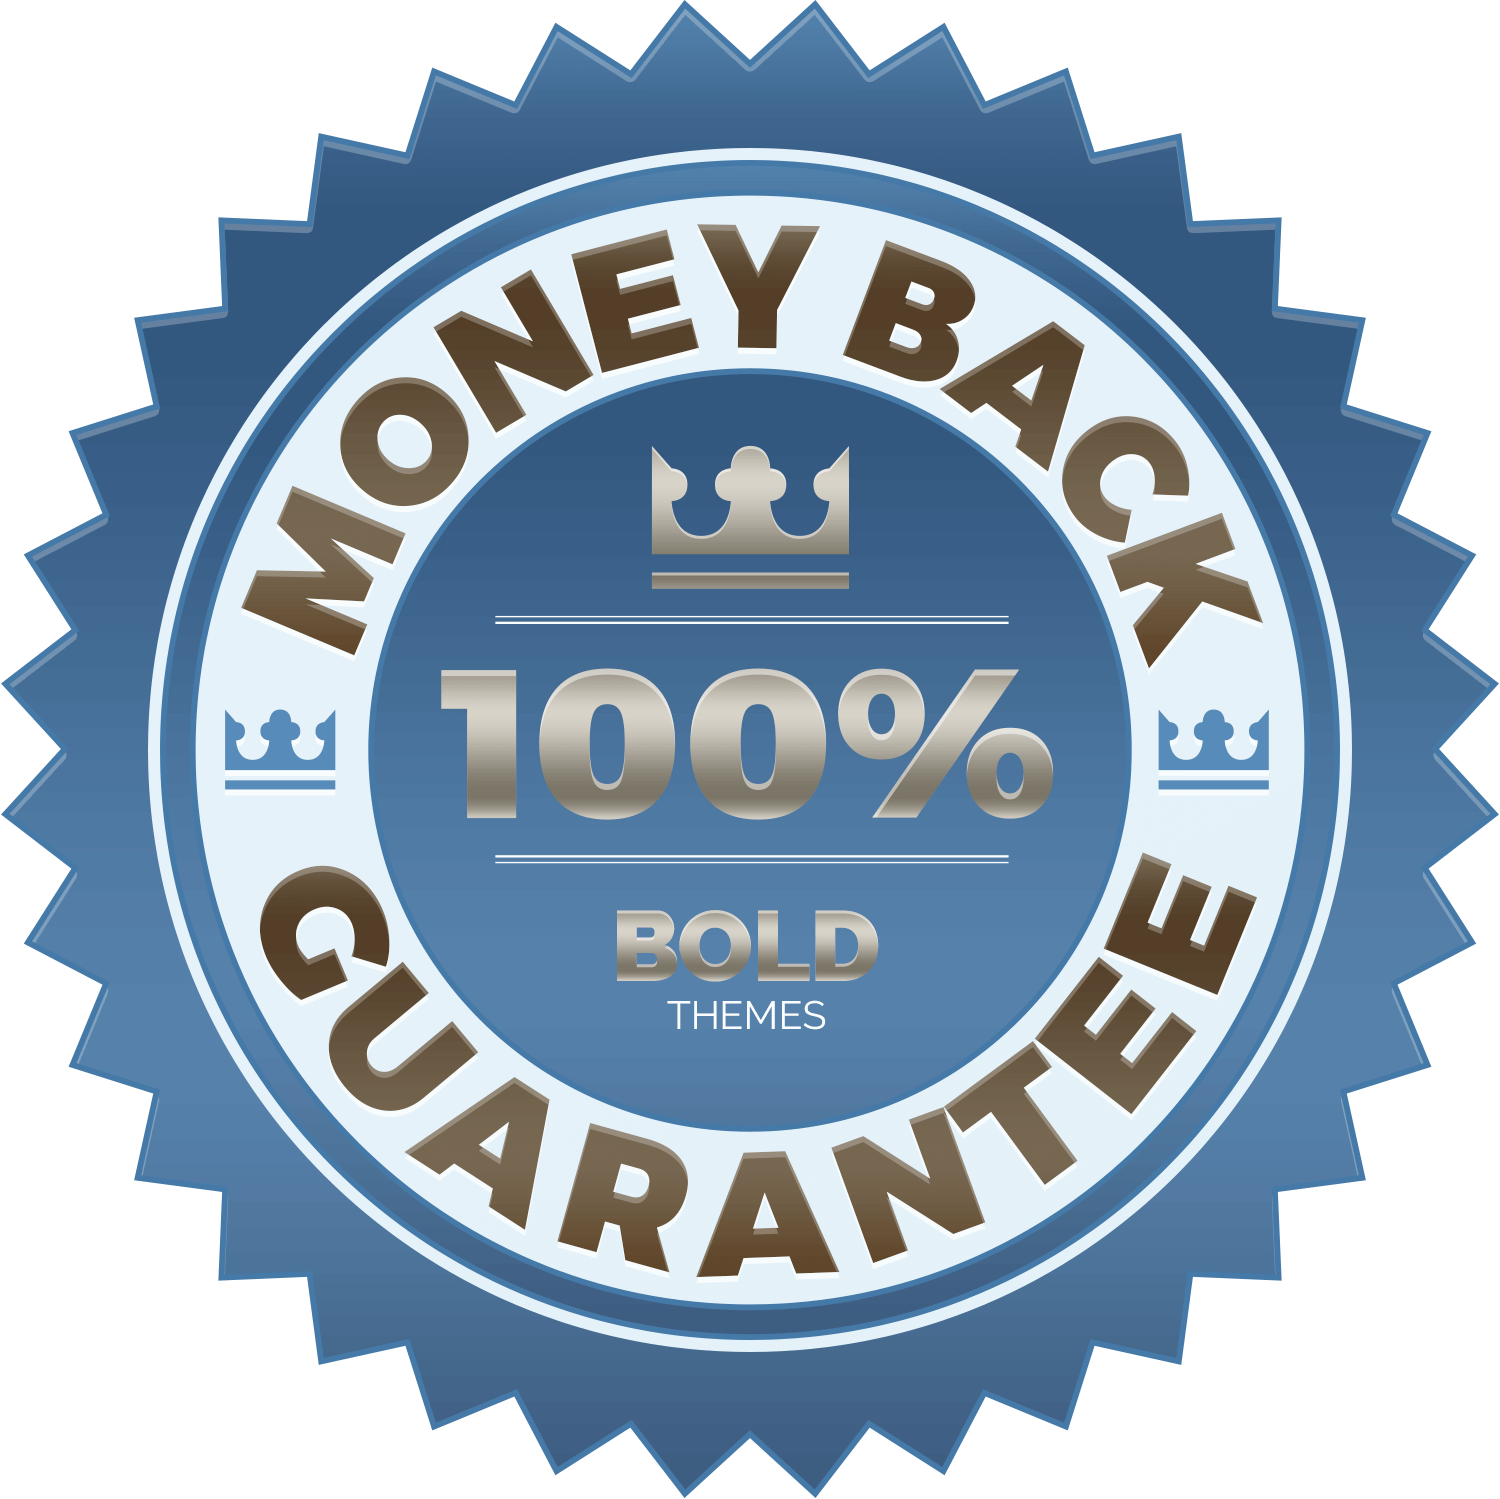 https://abcdesign.pl/wp-content/uploads/2017/05/Money-back-guarantee.png